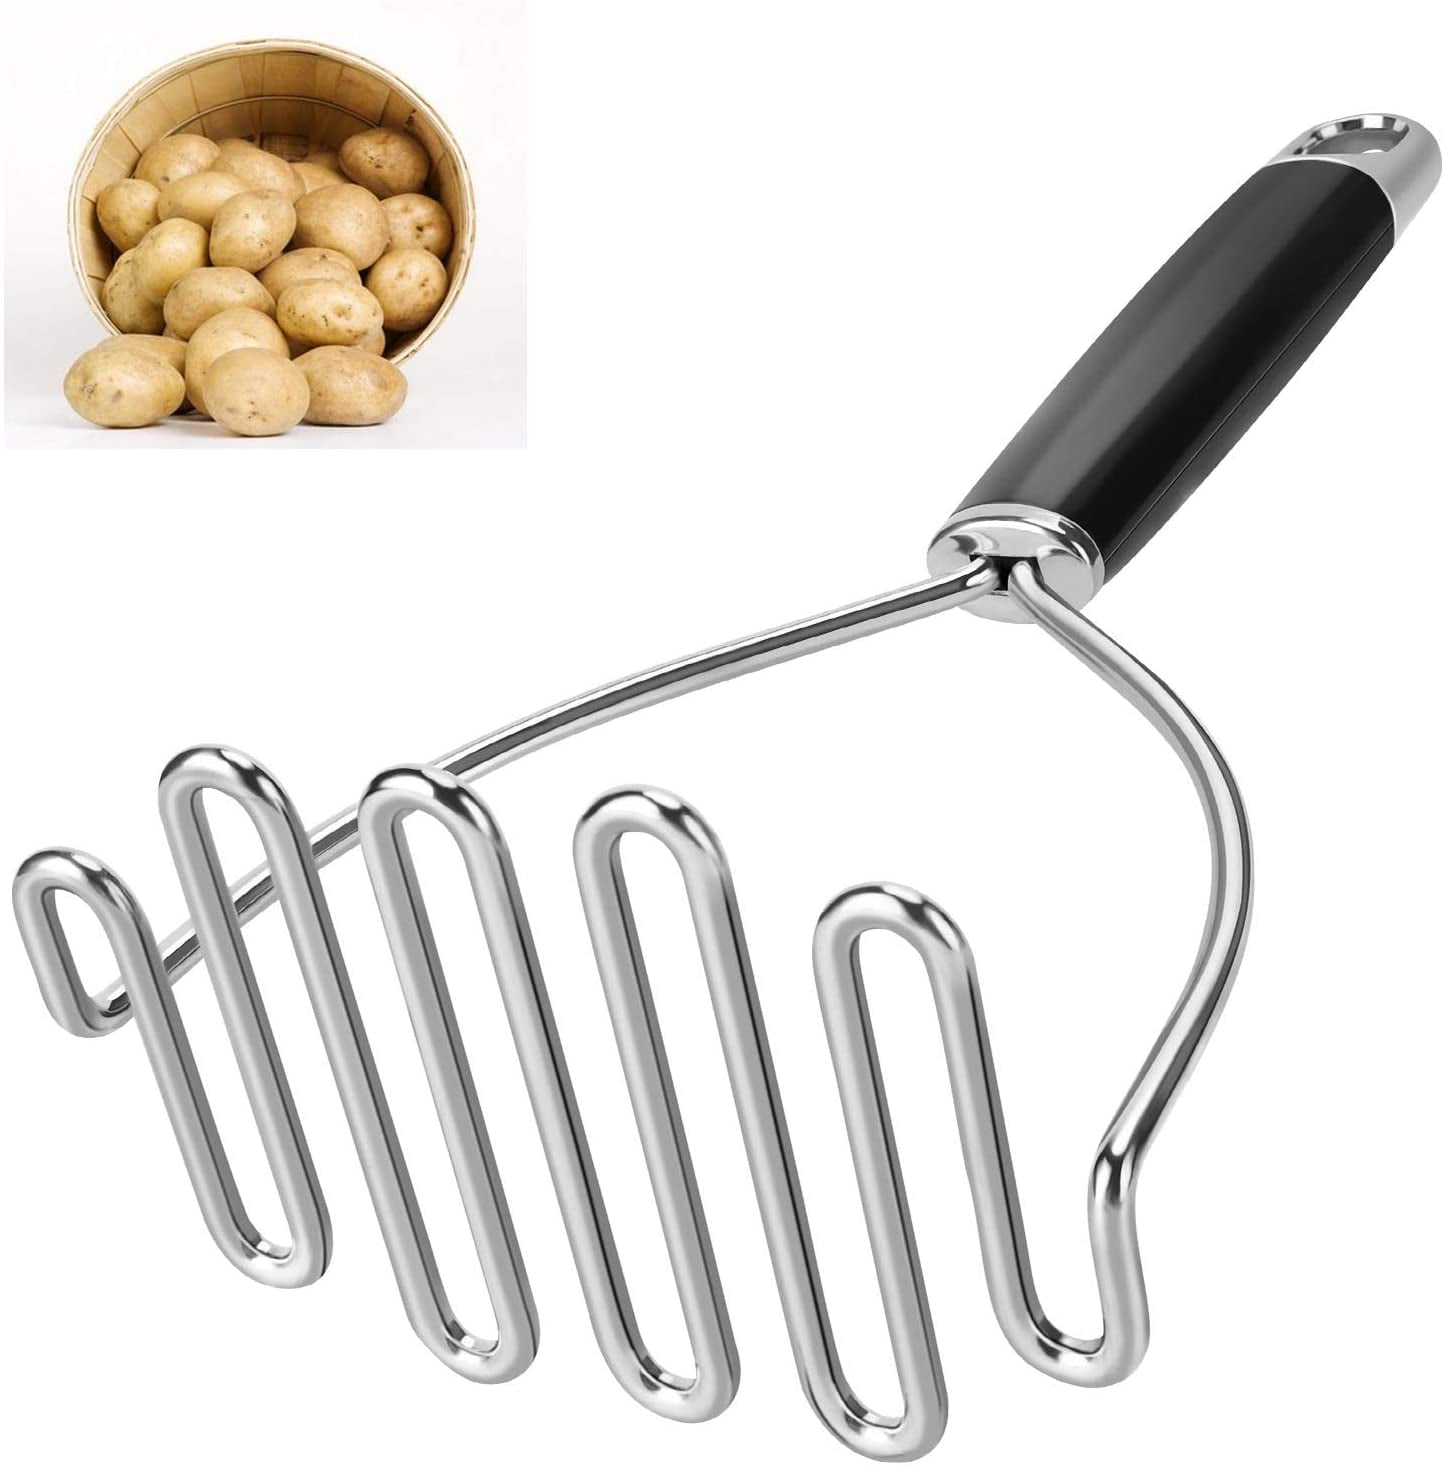 4Pcs Kitchen Stainless Steel Potato Masher, Potato Hand Tool for Beans,  Avocado, Egg, Mini Mashed Potatoes, Bananas and Other Foods 